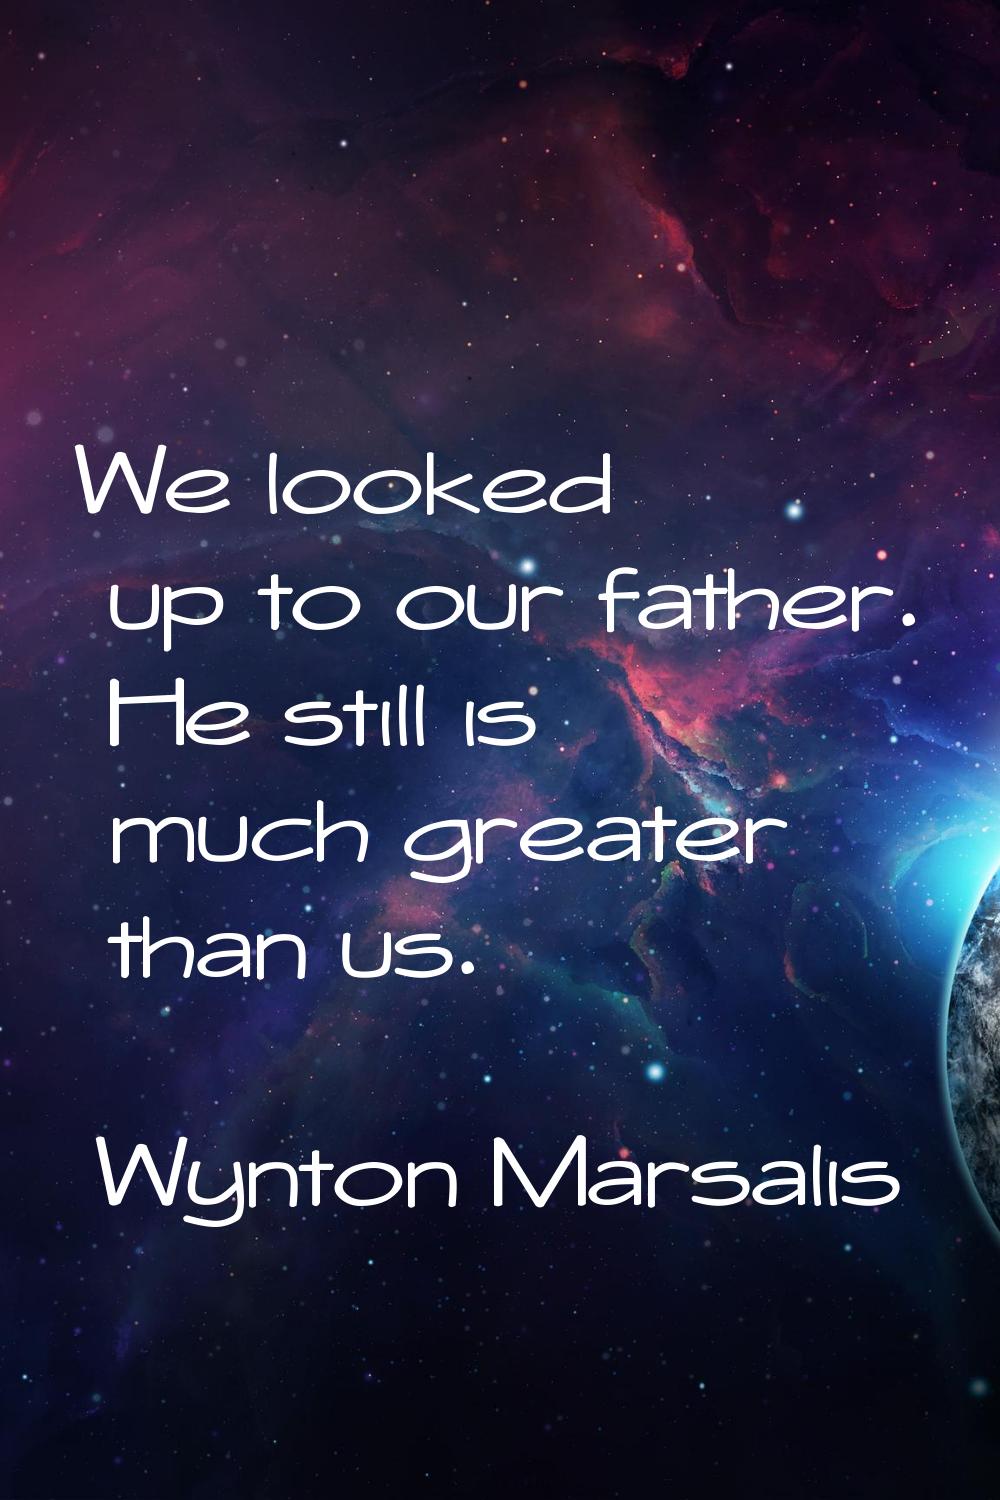 We looked up to our father. He still is much greater than us.